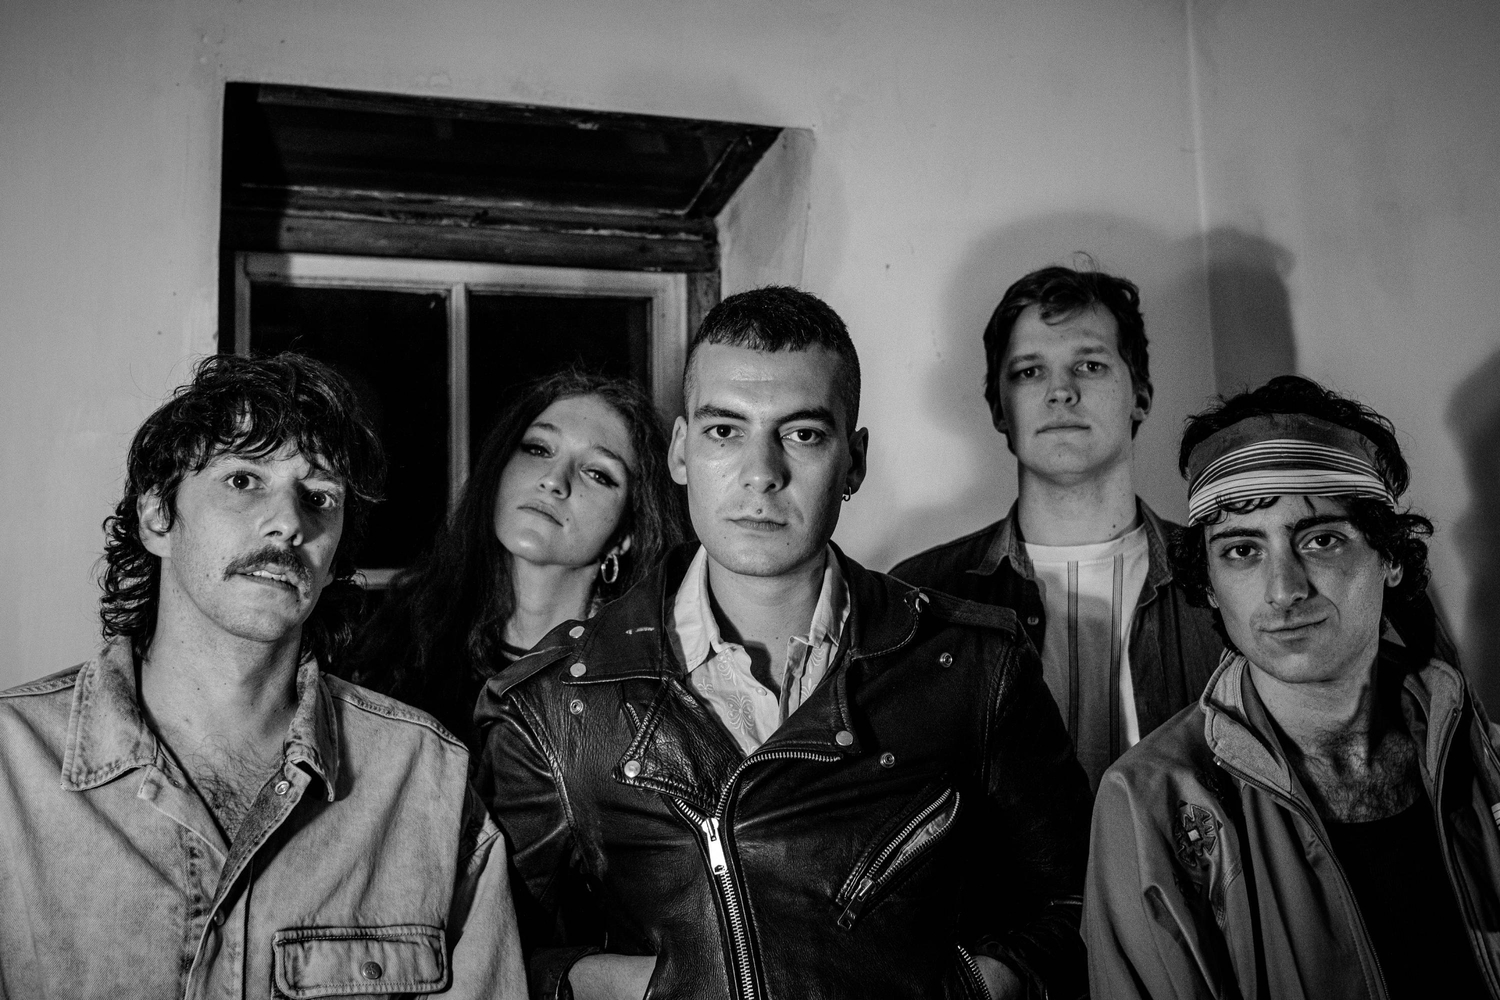 Get To Know... The Gulps